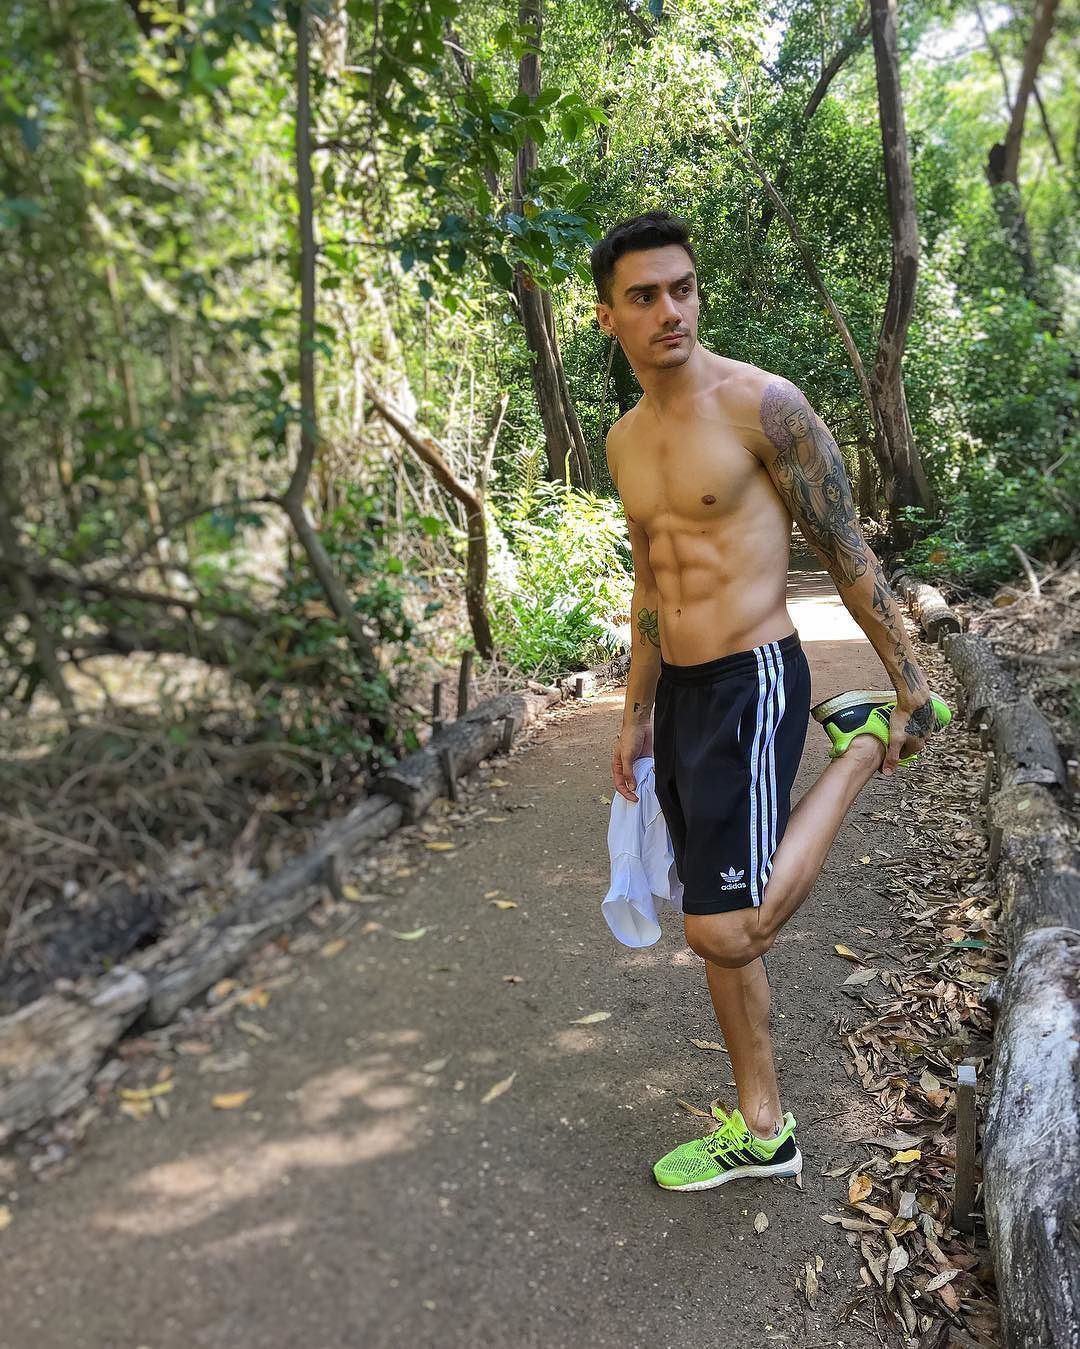 shirtless-fit-tattoo-abs-hot-guy-in-shape-running-woods